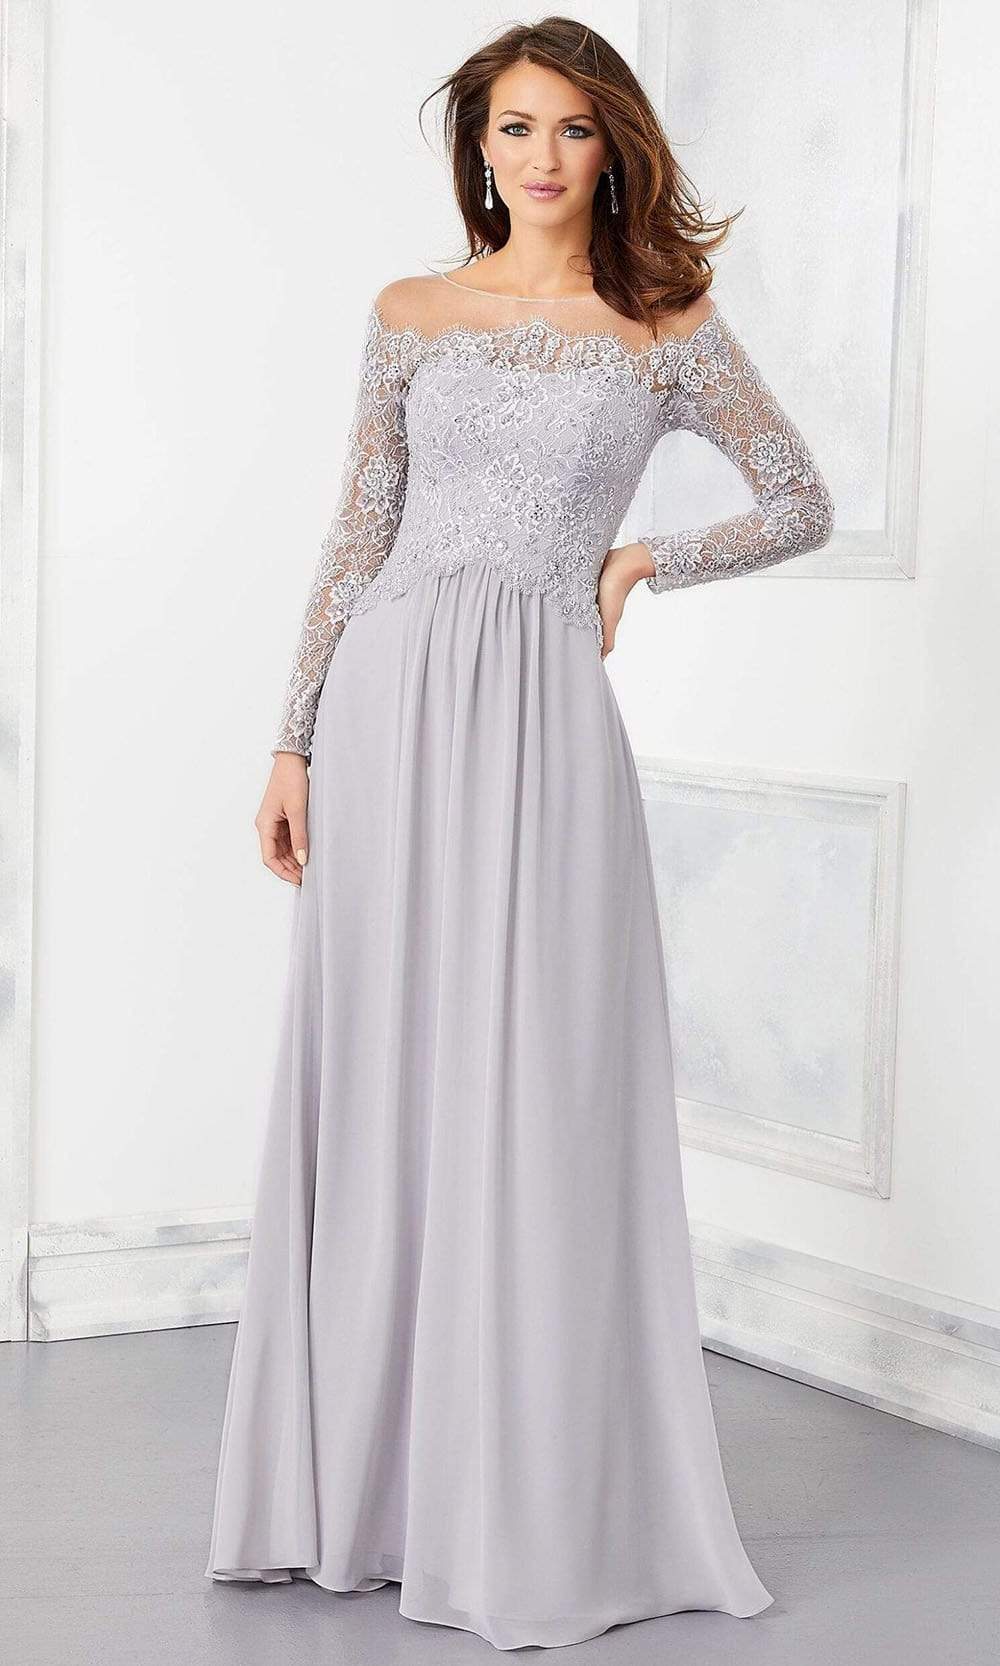 Mori Lee - 72310 Crystal Beaded Illusion Lace Bodice Chiffon Gown Special Occasion Dress 2 / Silver